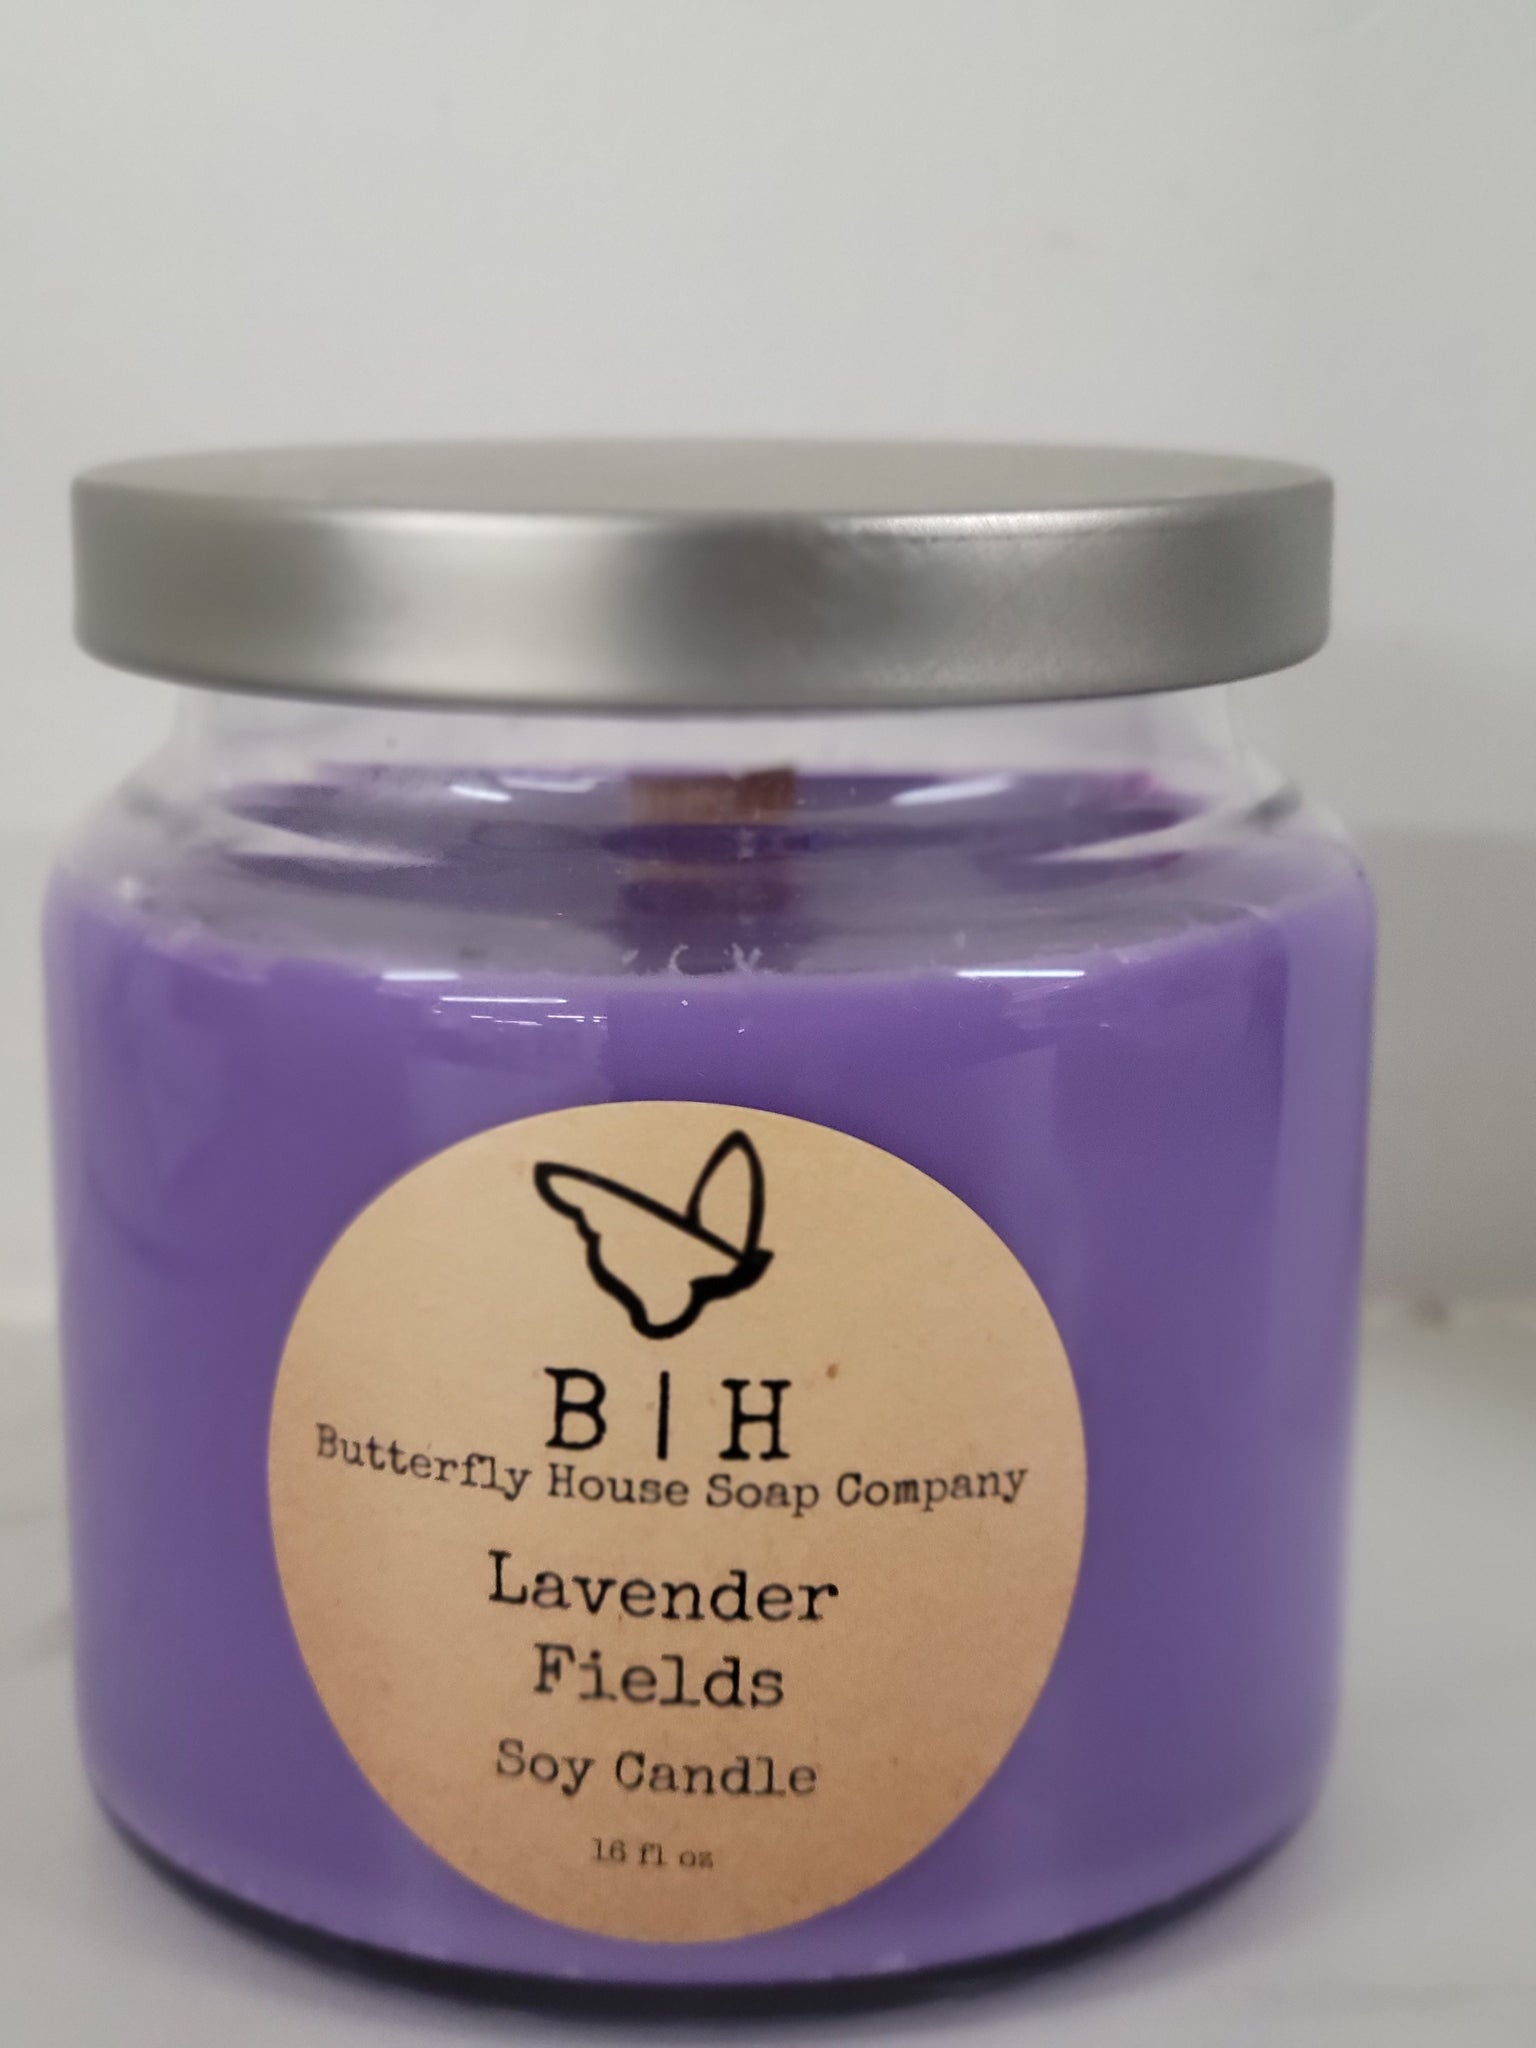 26 fl oz Soy Candle Jars – Butterfly House Soap Company